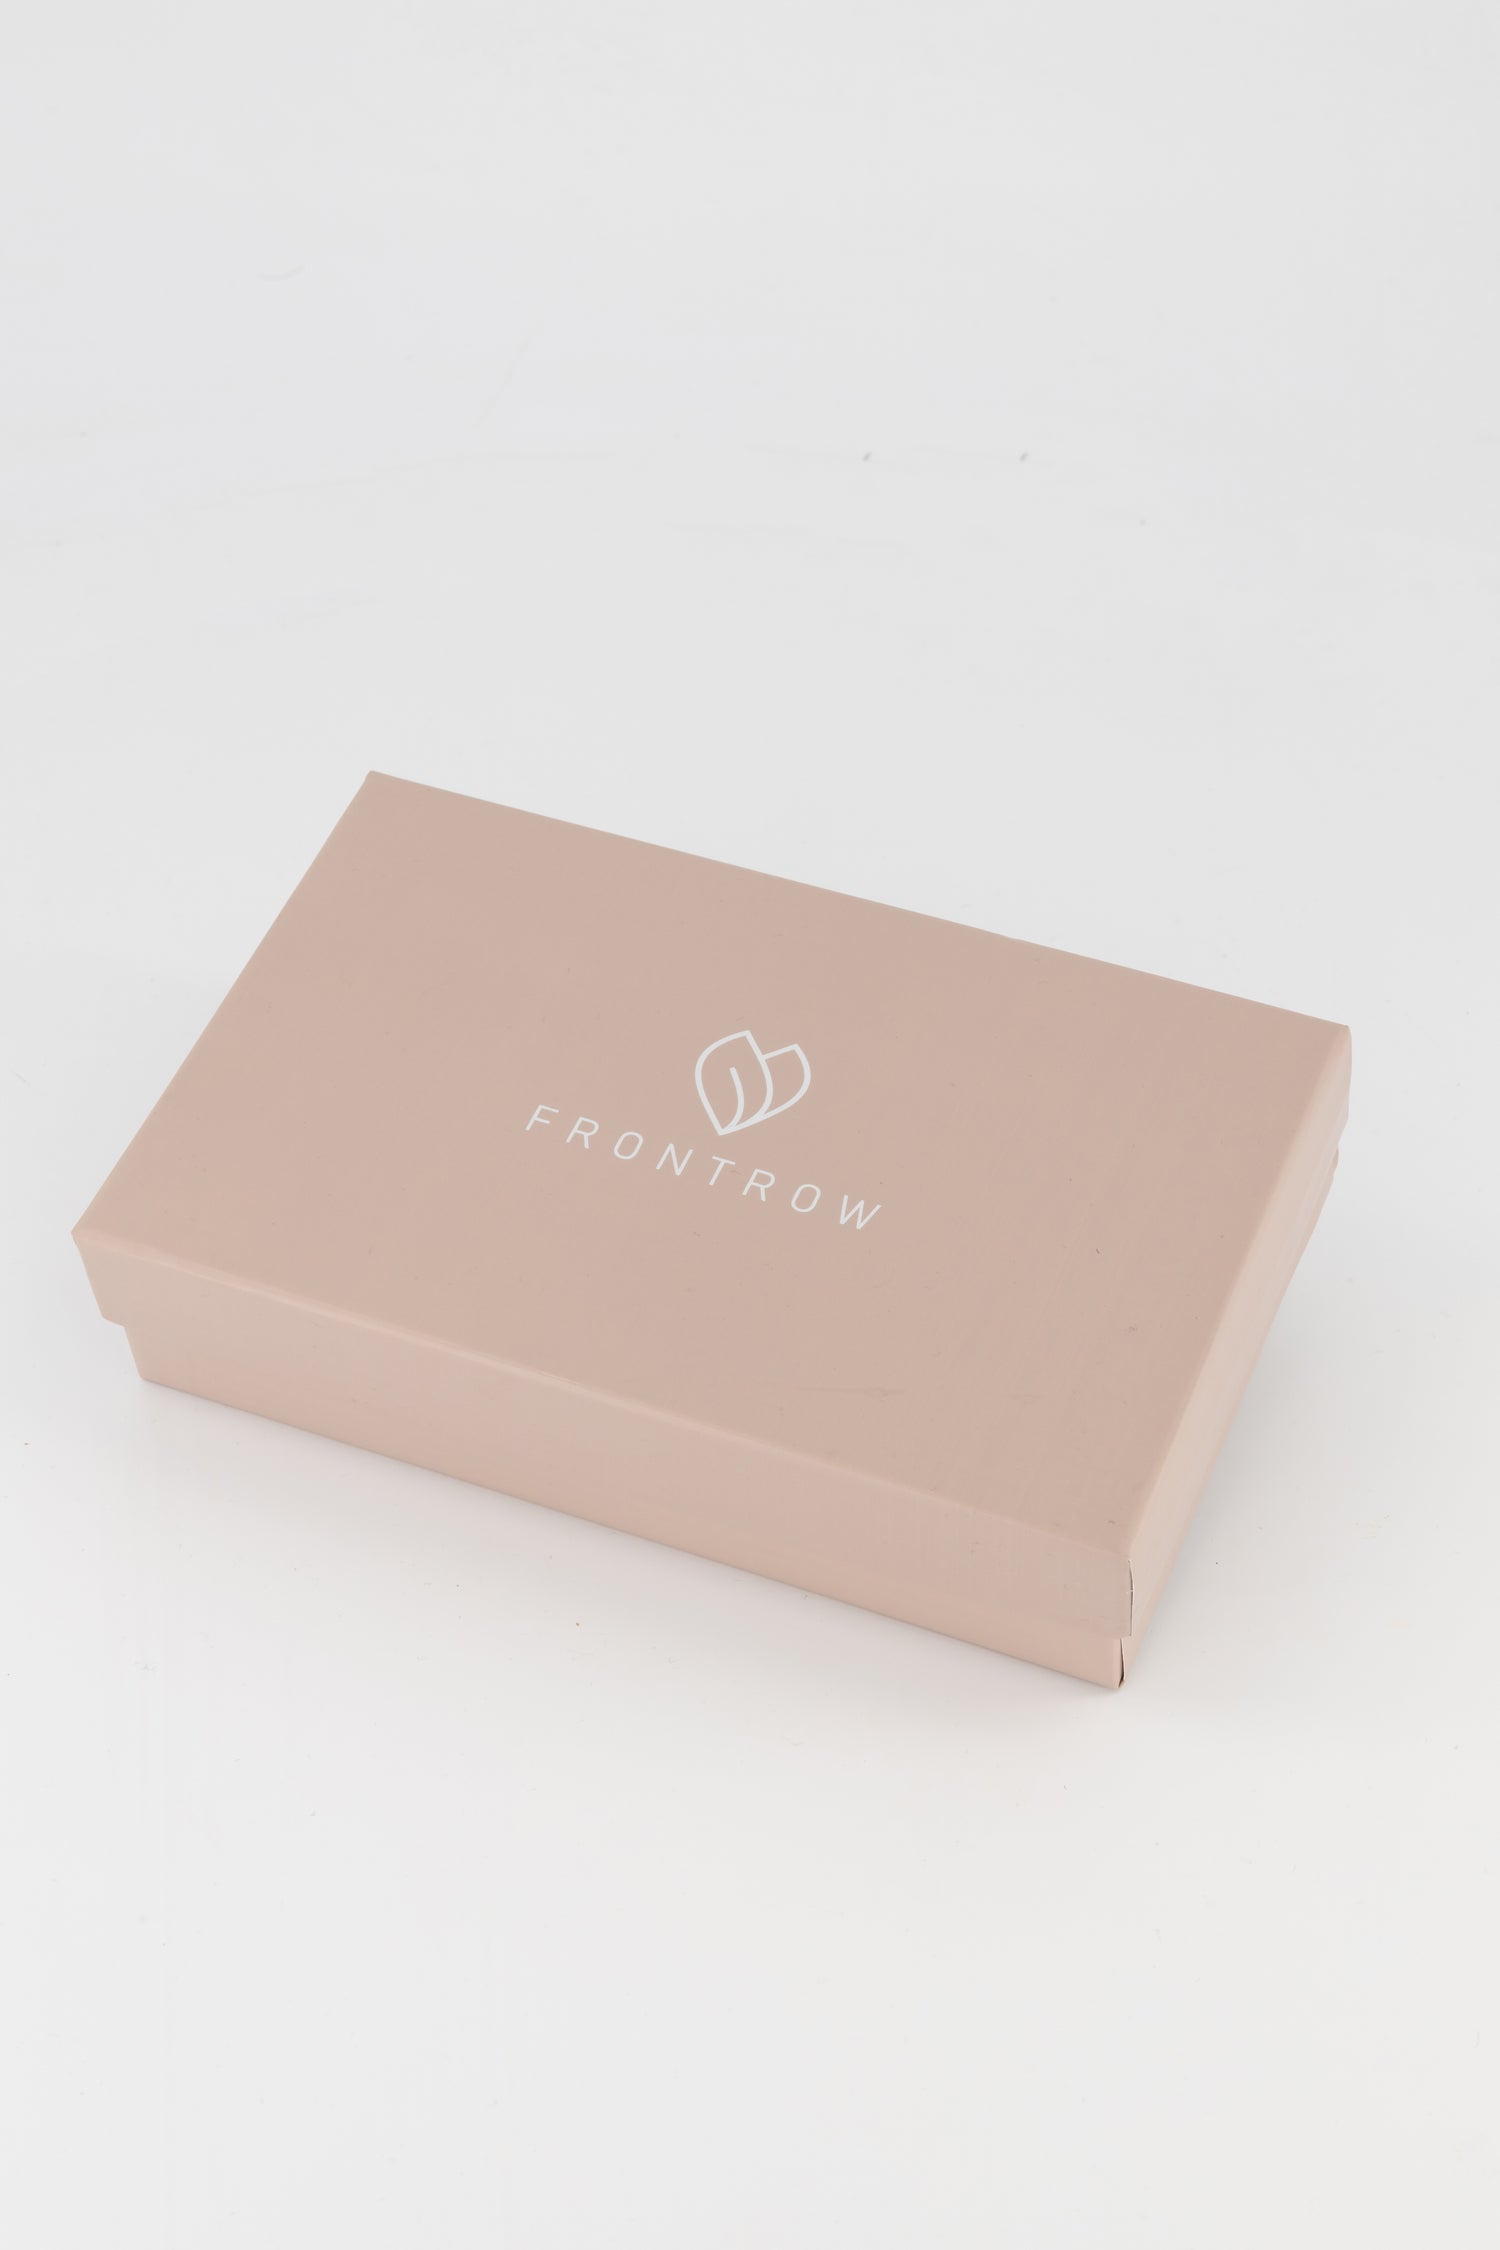 Frontrow clip in hair extensions packaging box